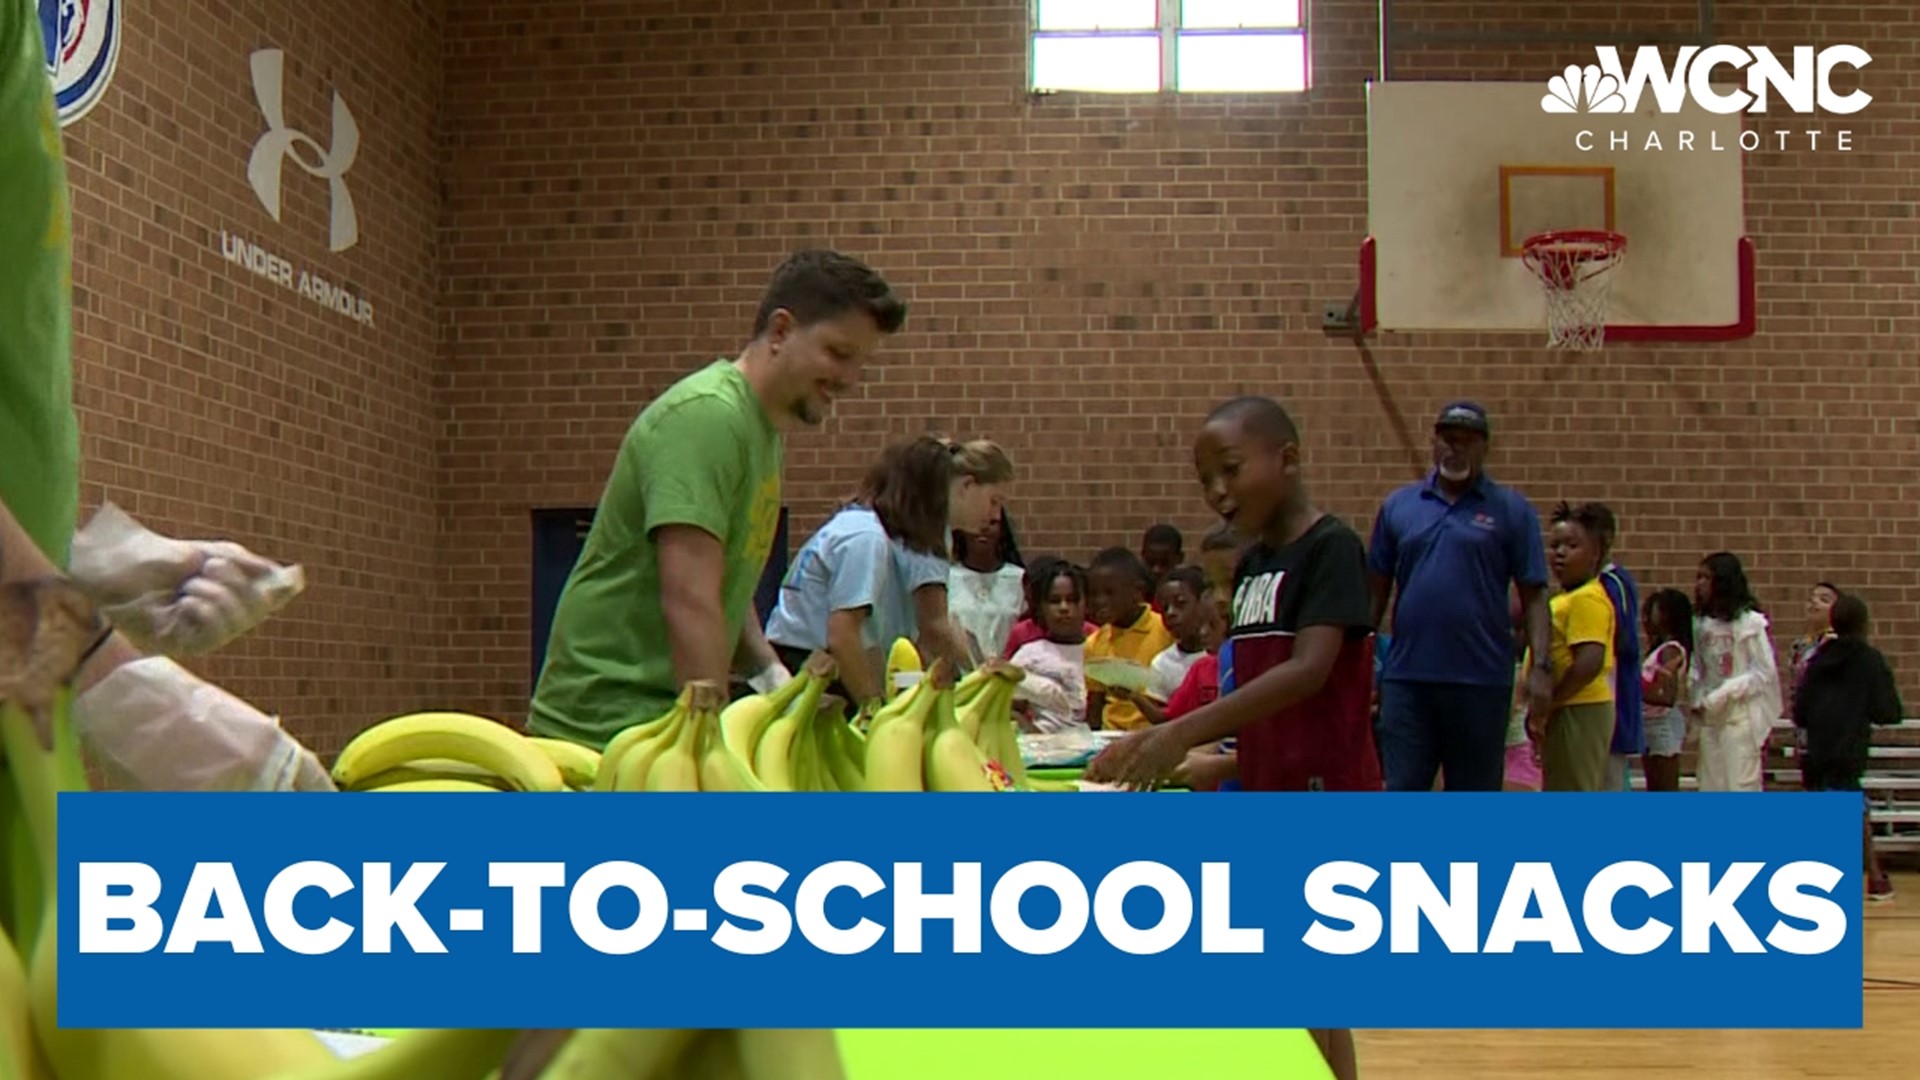 Dole Foods is worked with the Boys & Girls Clubs of Charlotte to host a back-to-school event promoting healthy eating habits.